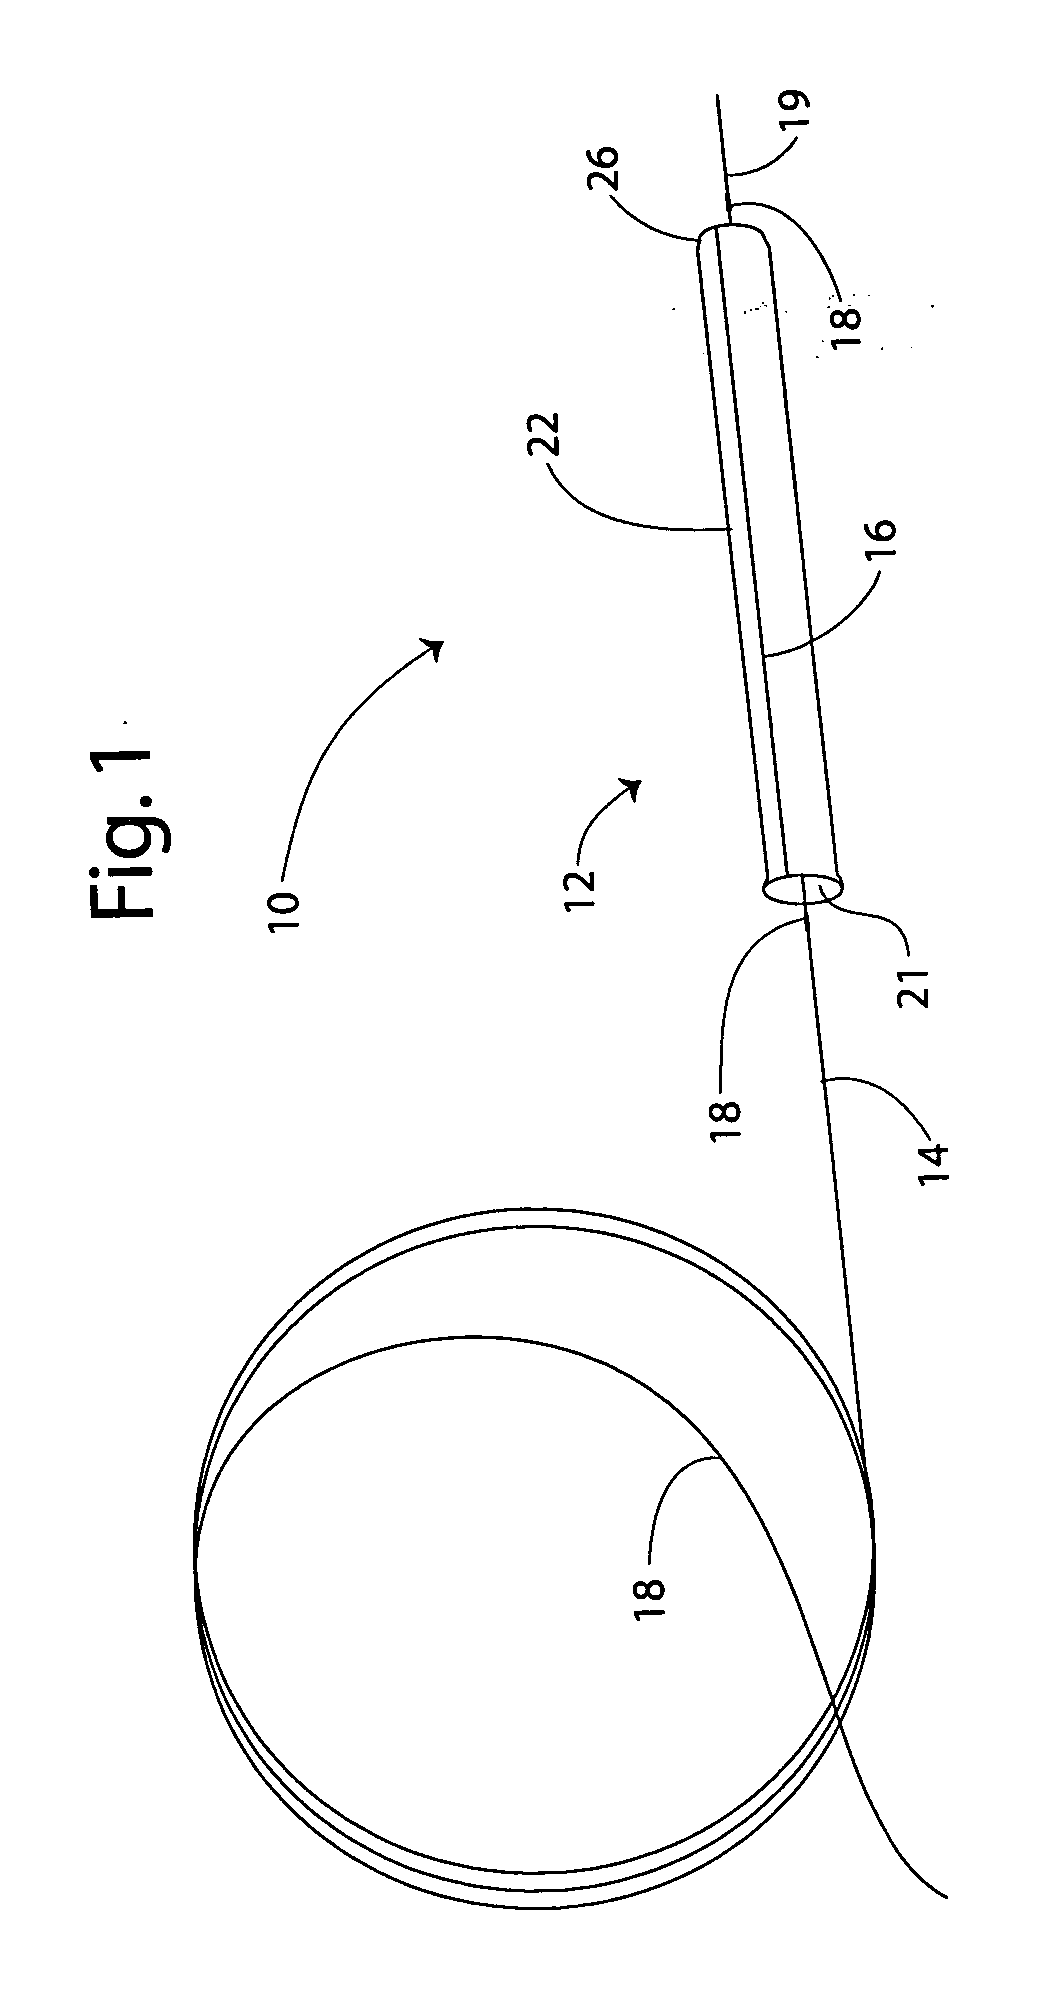 Method for placing a stent through a constricted lumen, and medical device